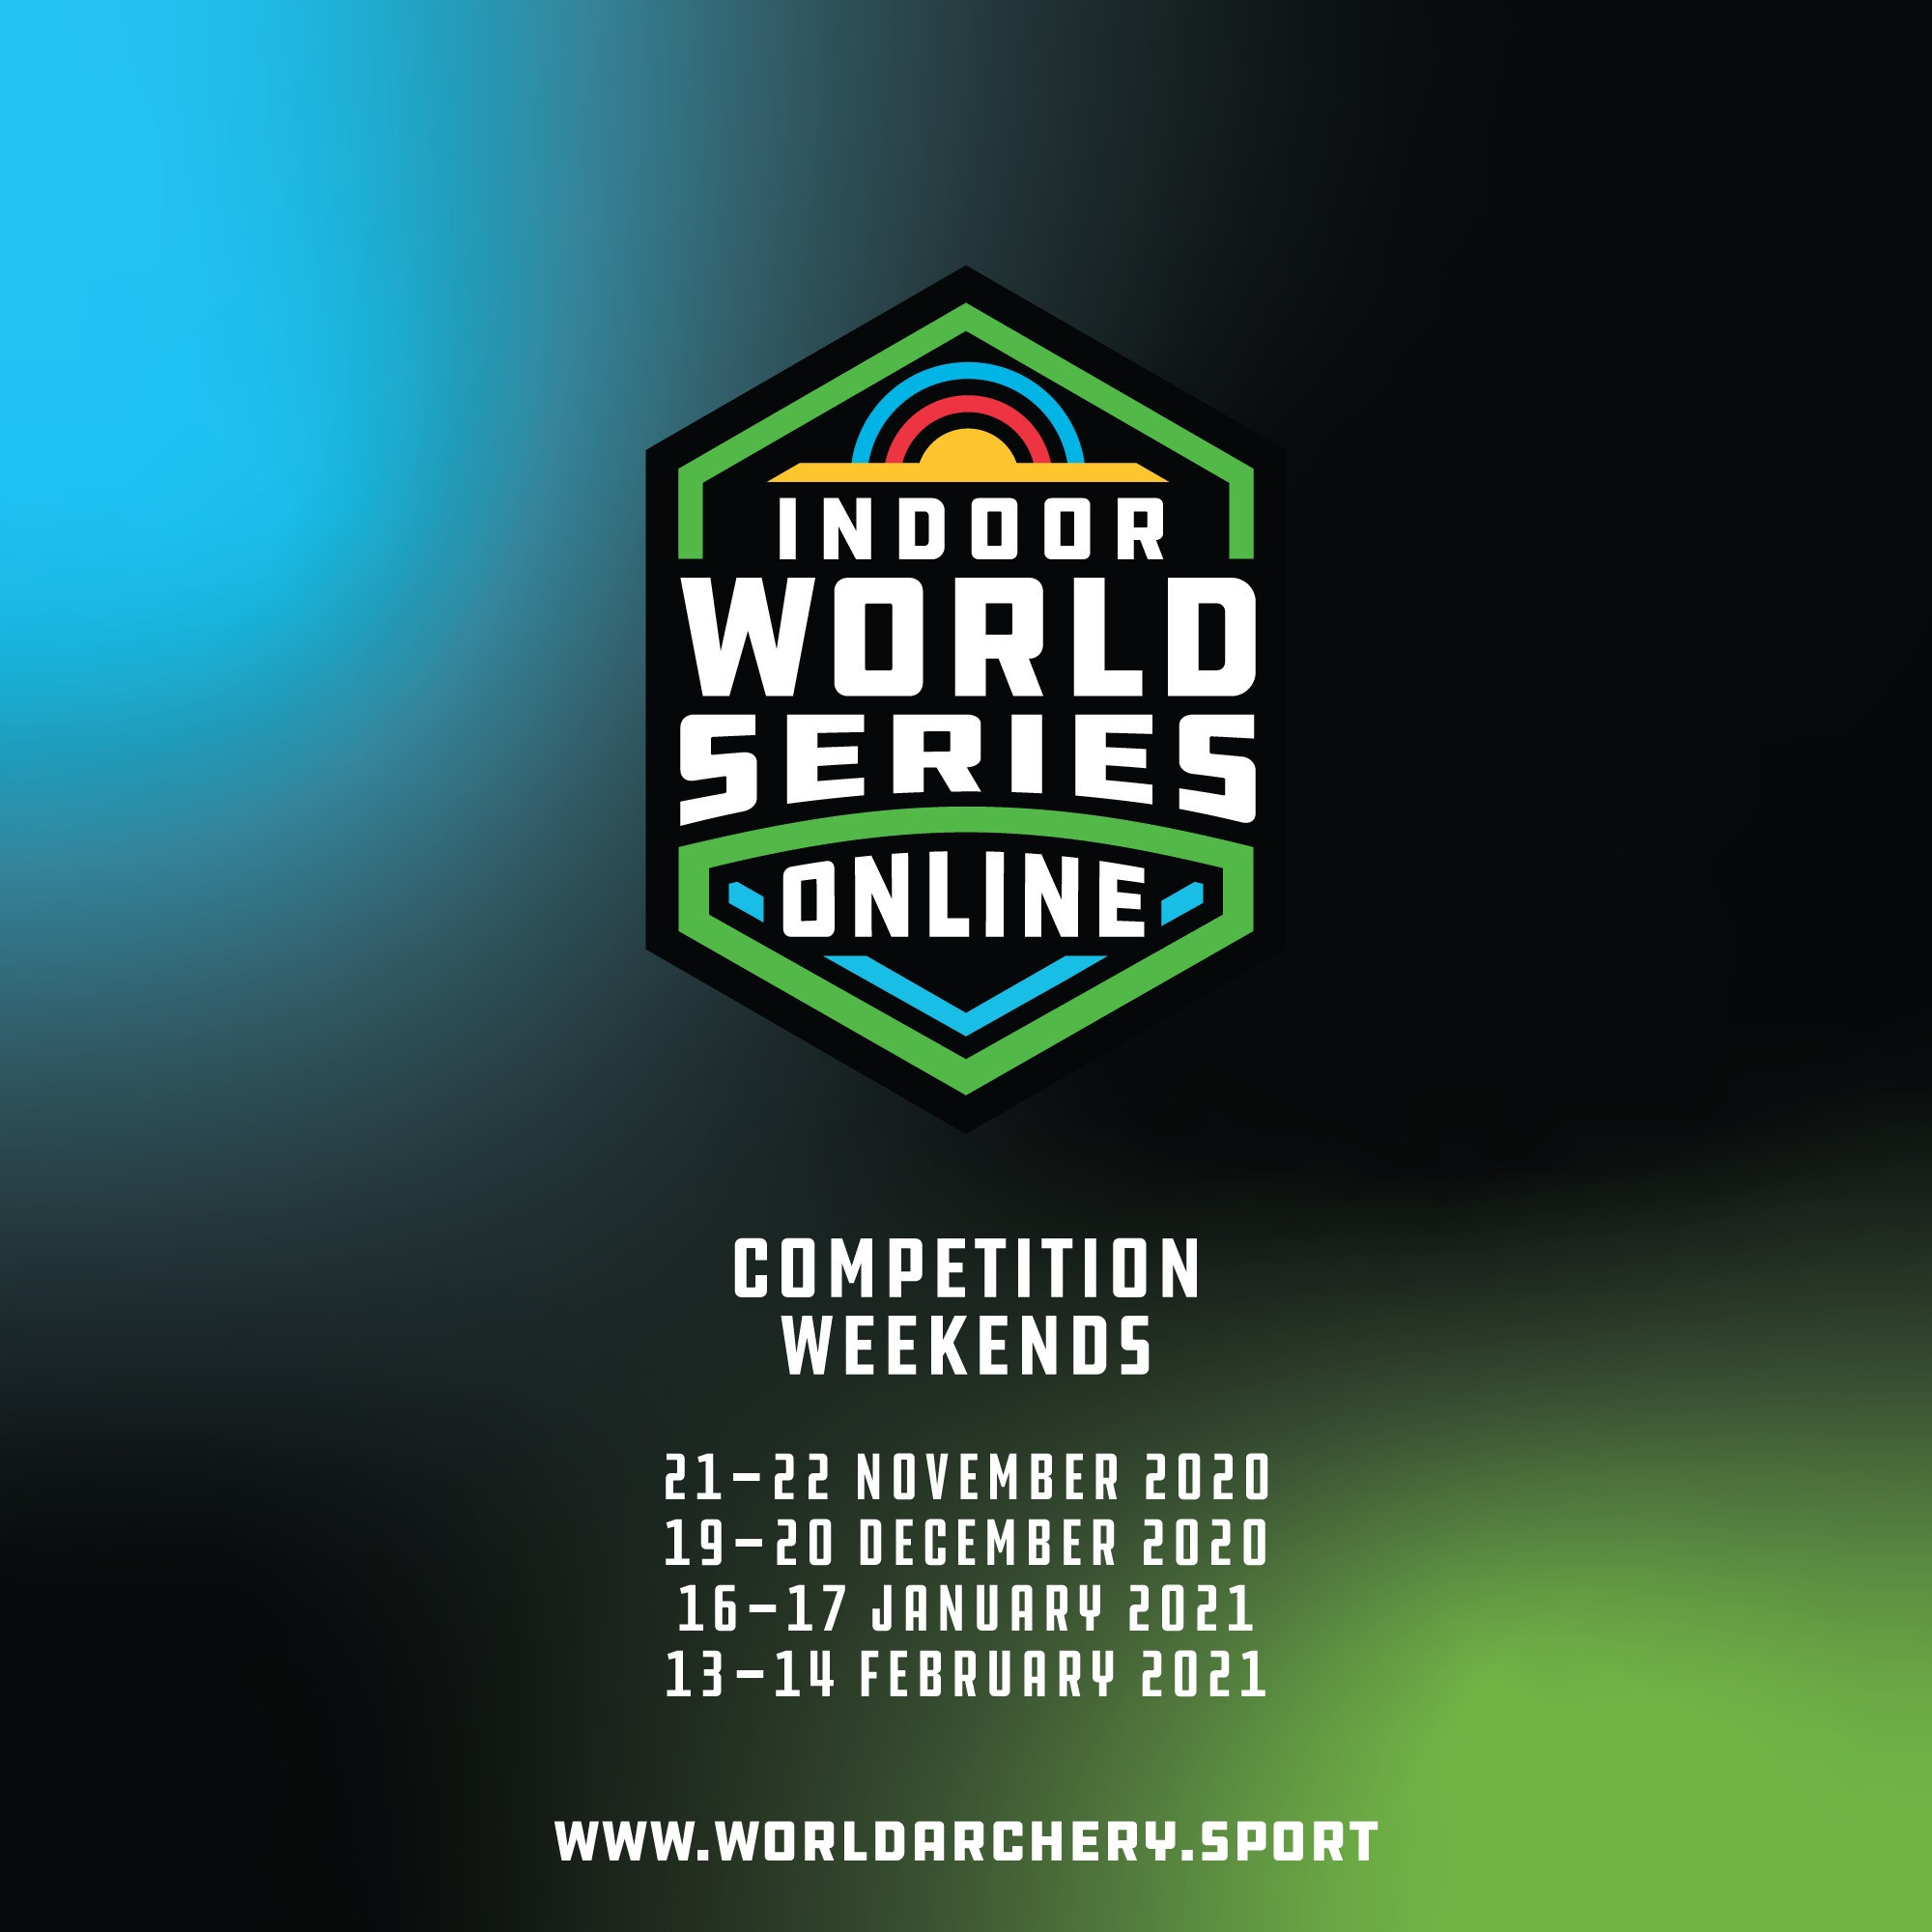 The tournament will no longer coincide with the third stage of the online Indoor Archery World Series ©World Archery